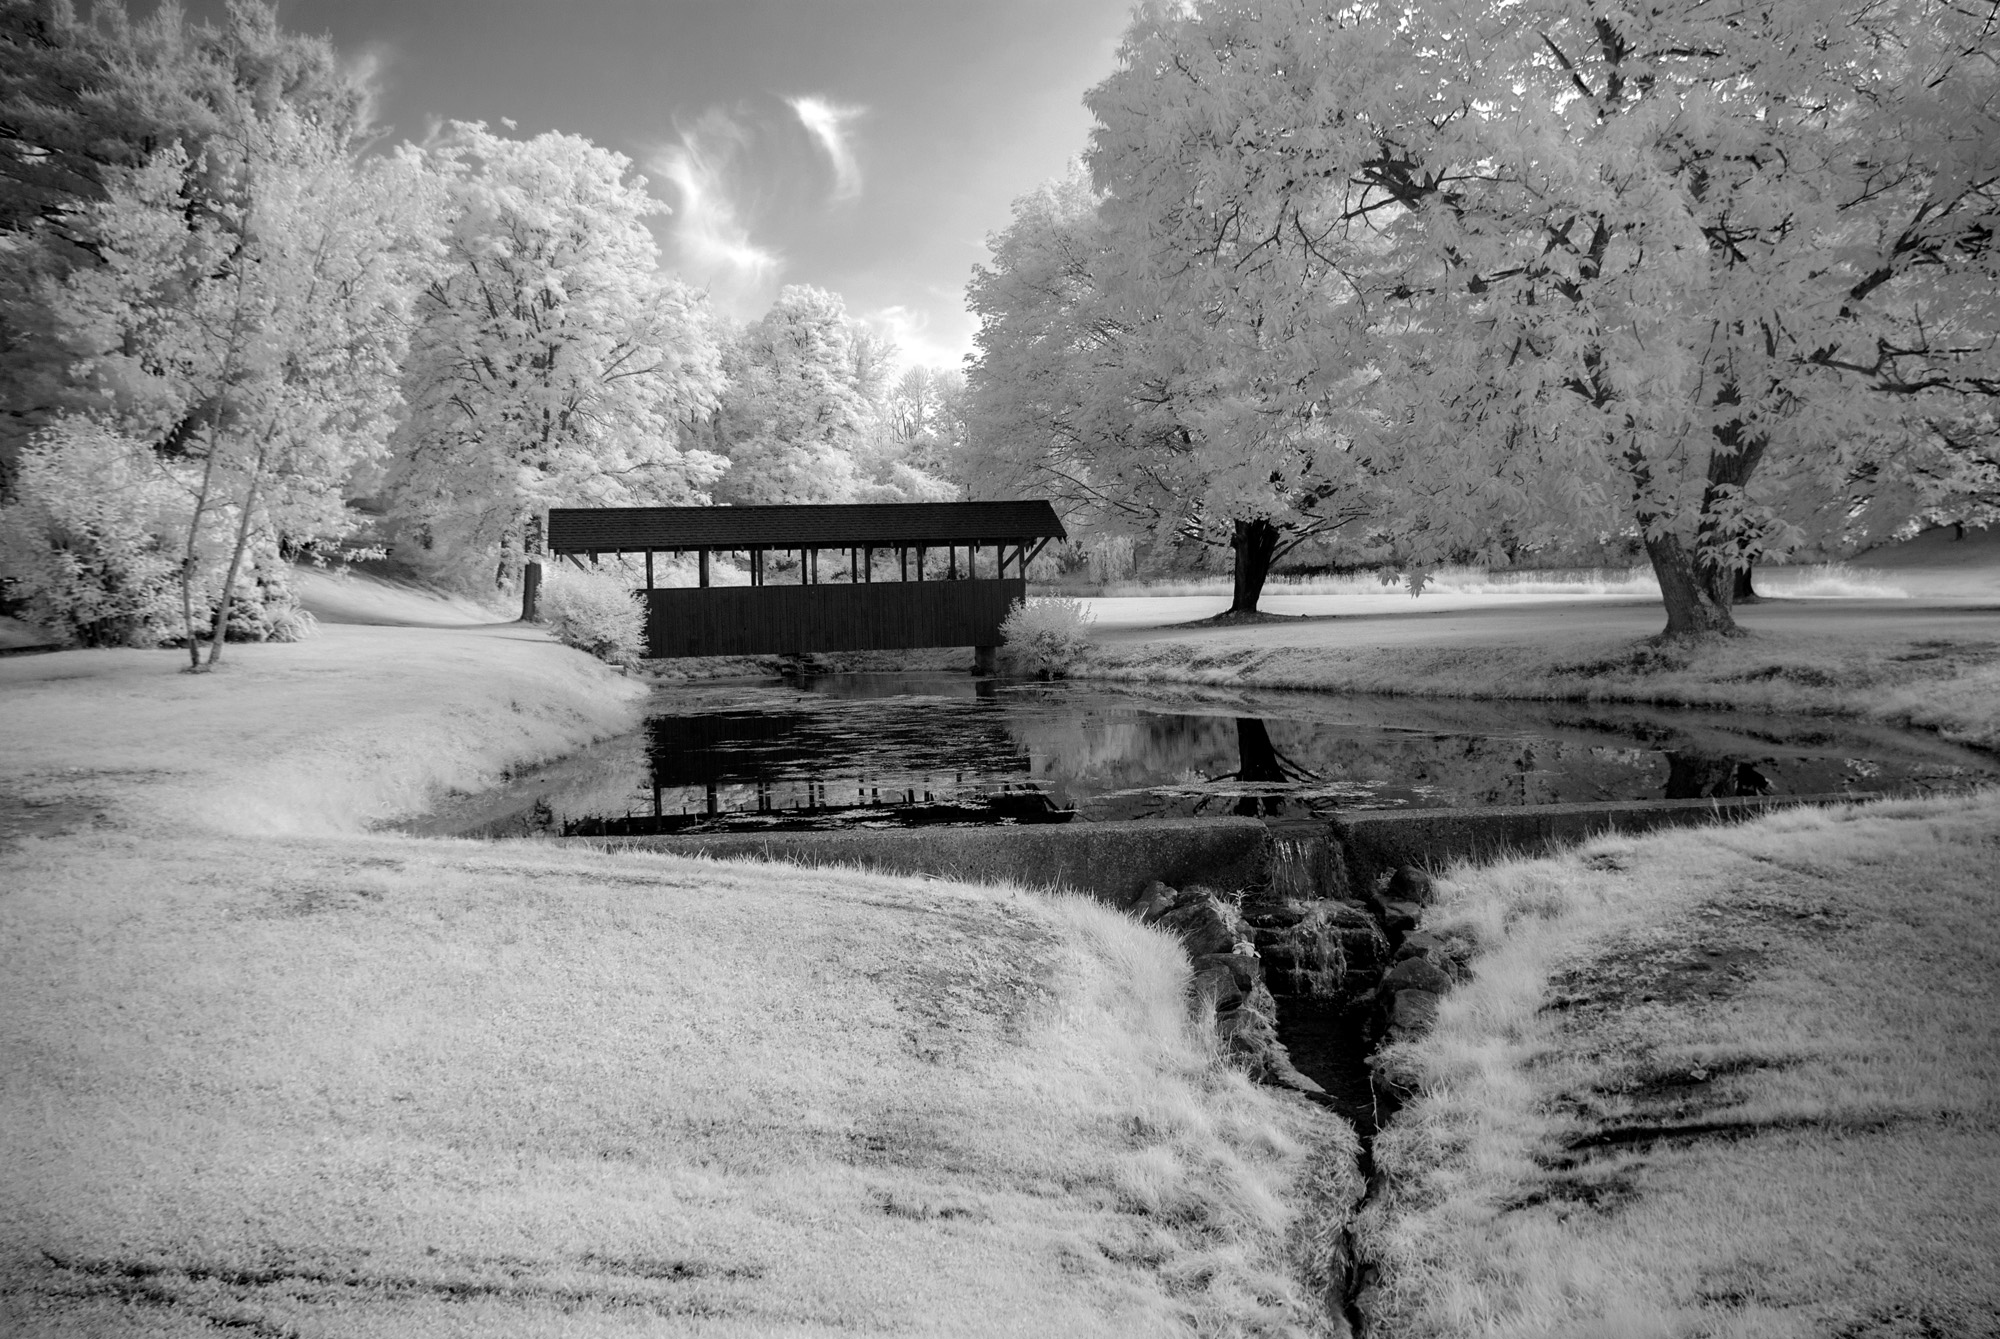 Black & White Infrared • A calm and picturesque scene near Kempton, PA • Black and White 720nm Infrared Photograph